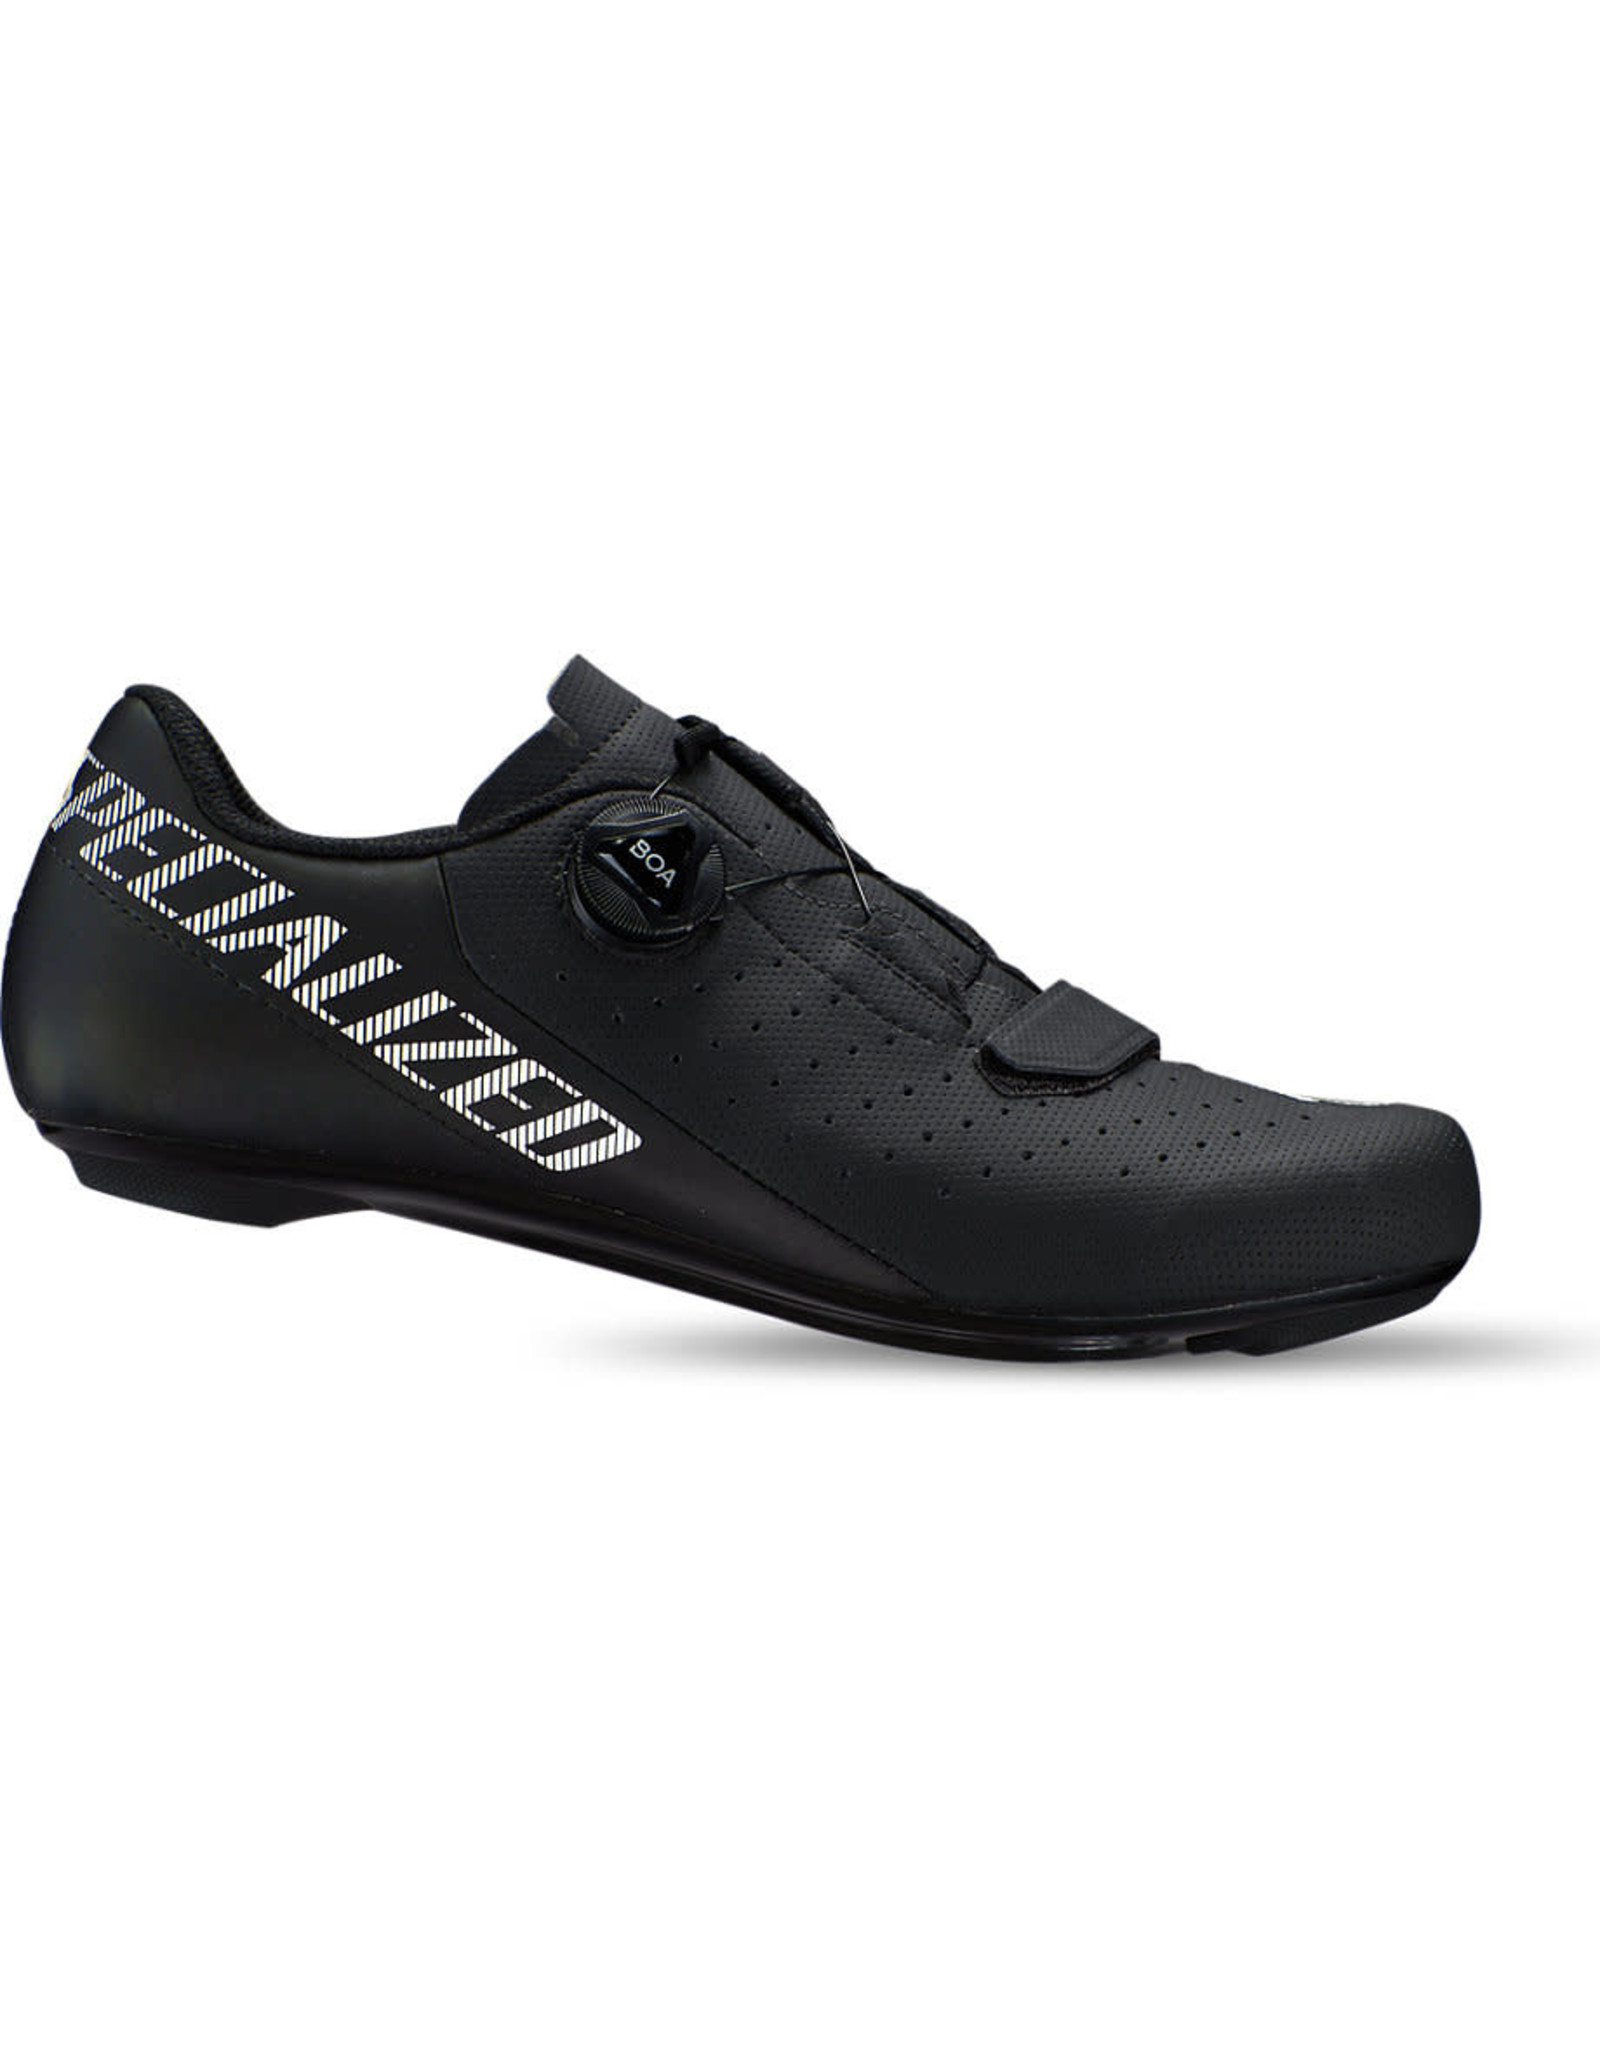 SPECIALIZED TORCH 1.0 ROAD SHOE